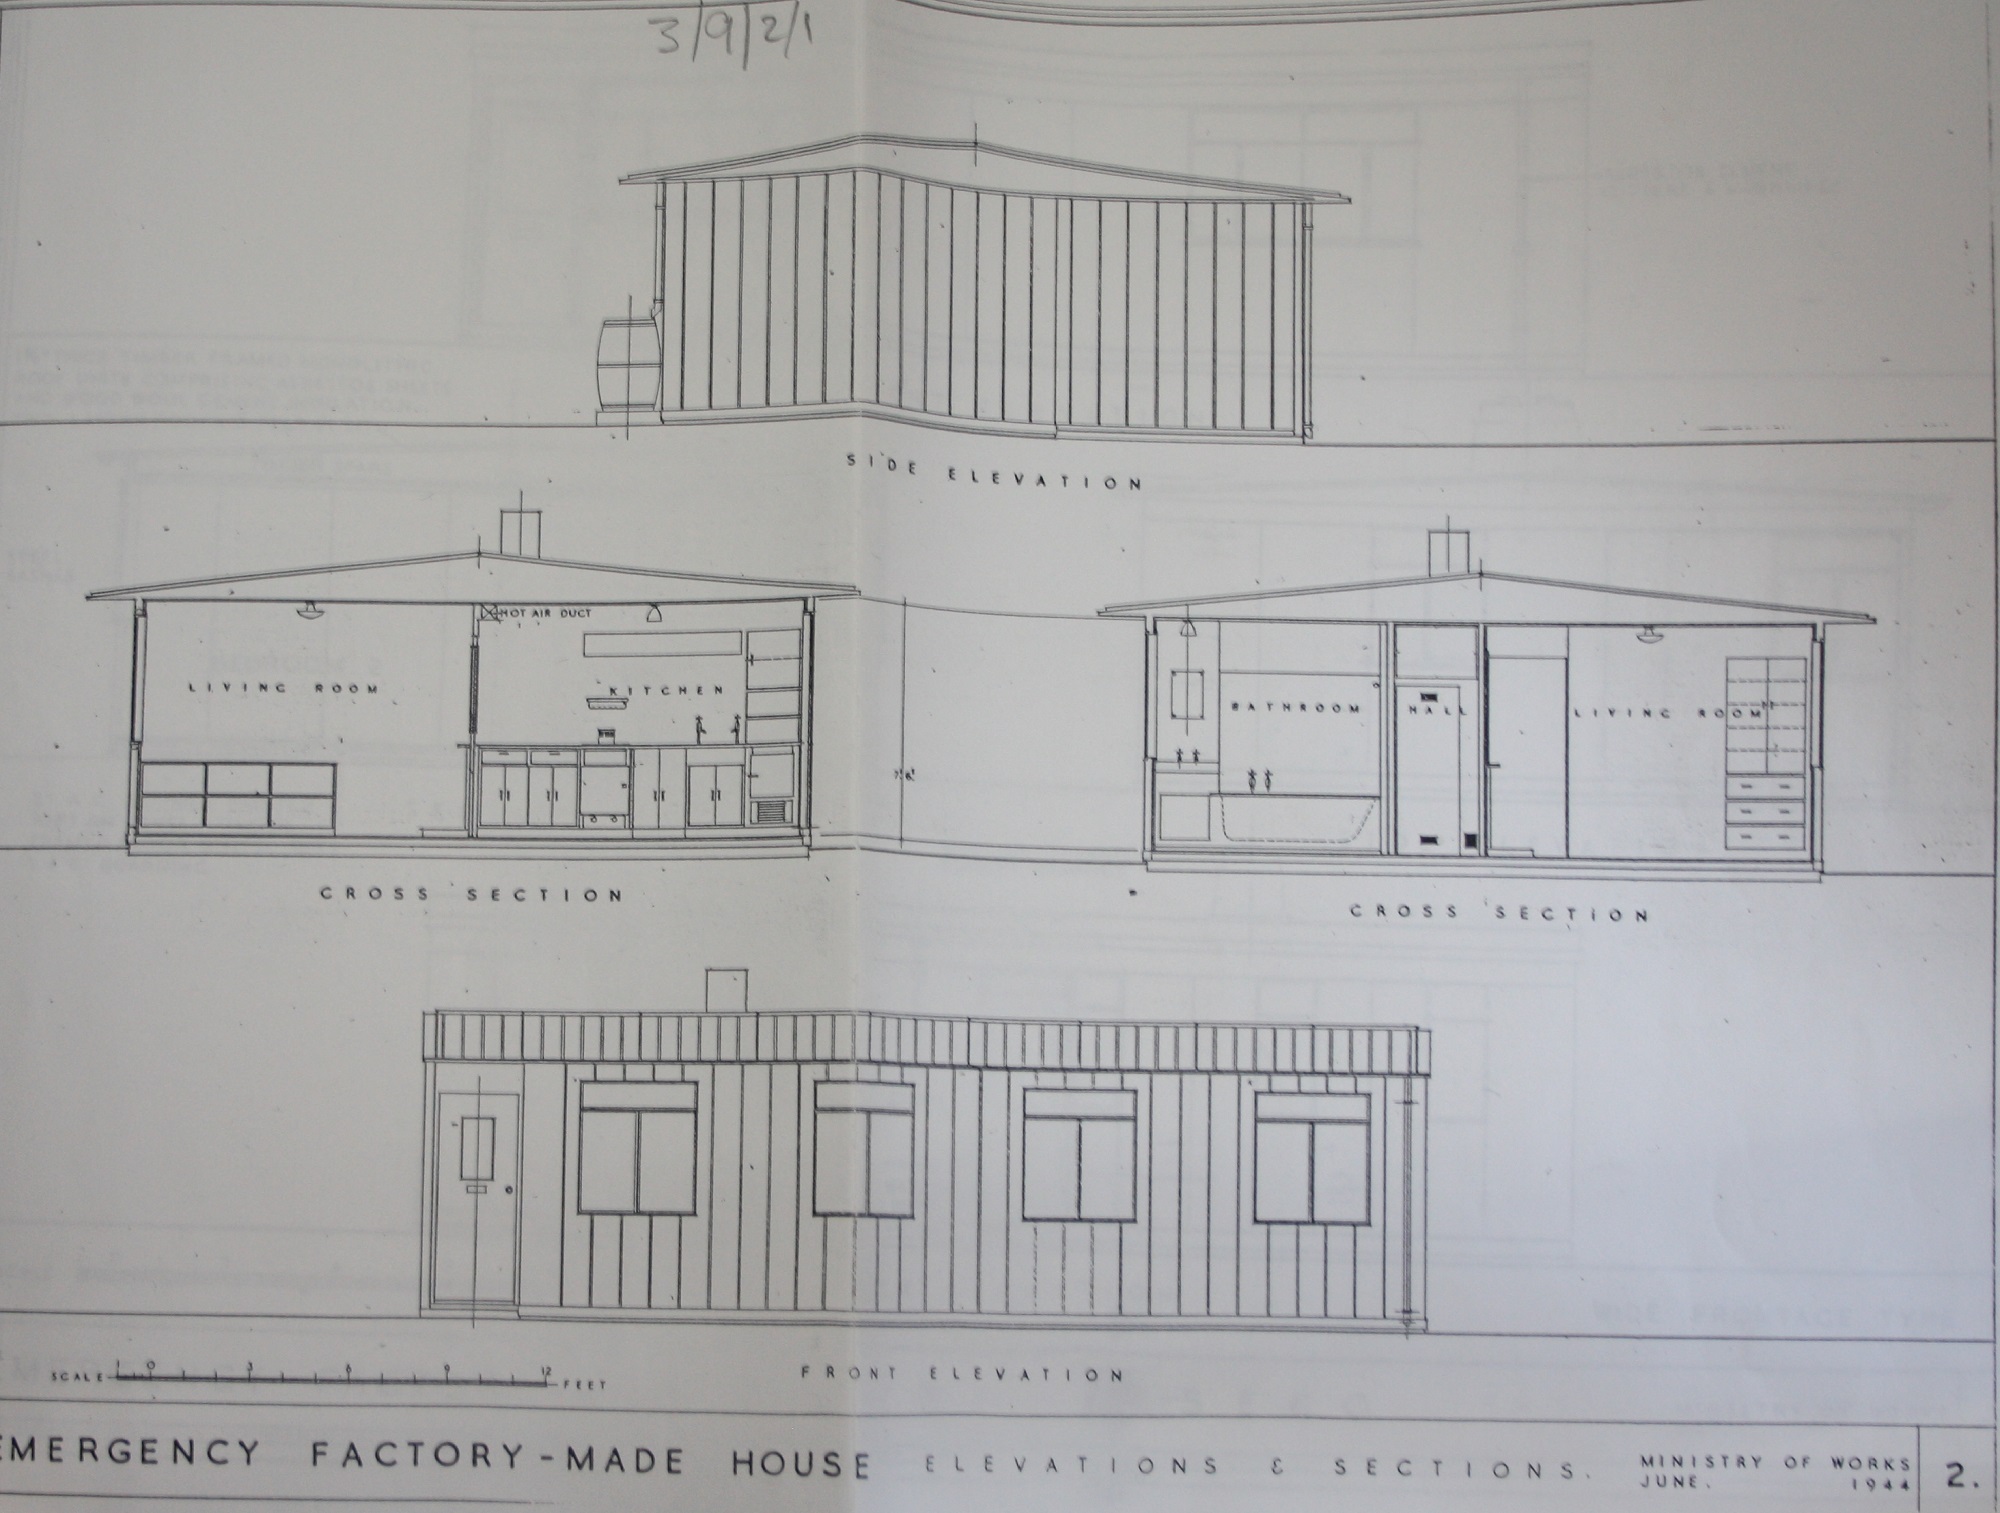 Emergency Factory Made House: Elevations & Sections. Ministry of Works October 1944